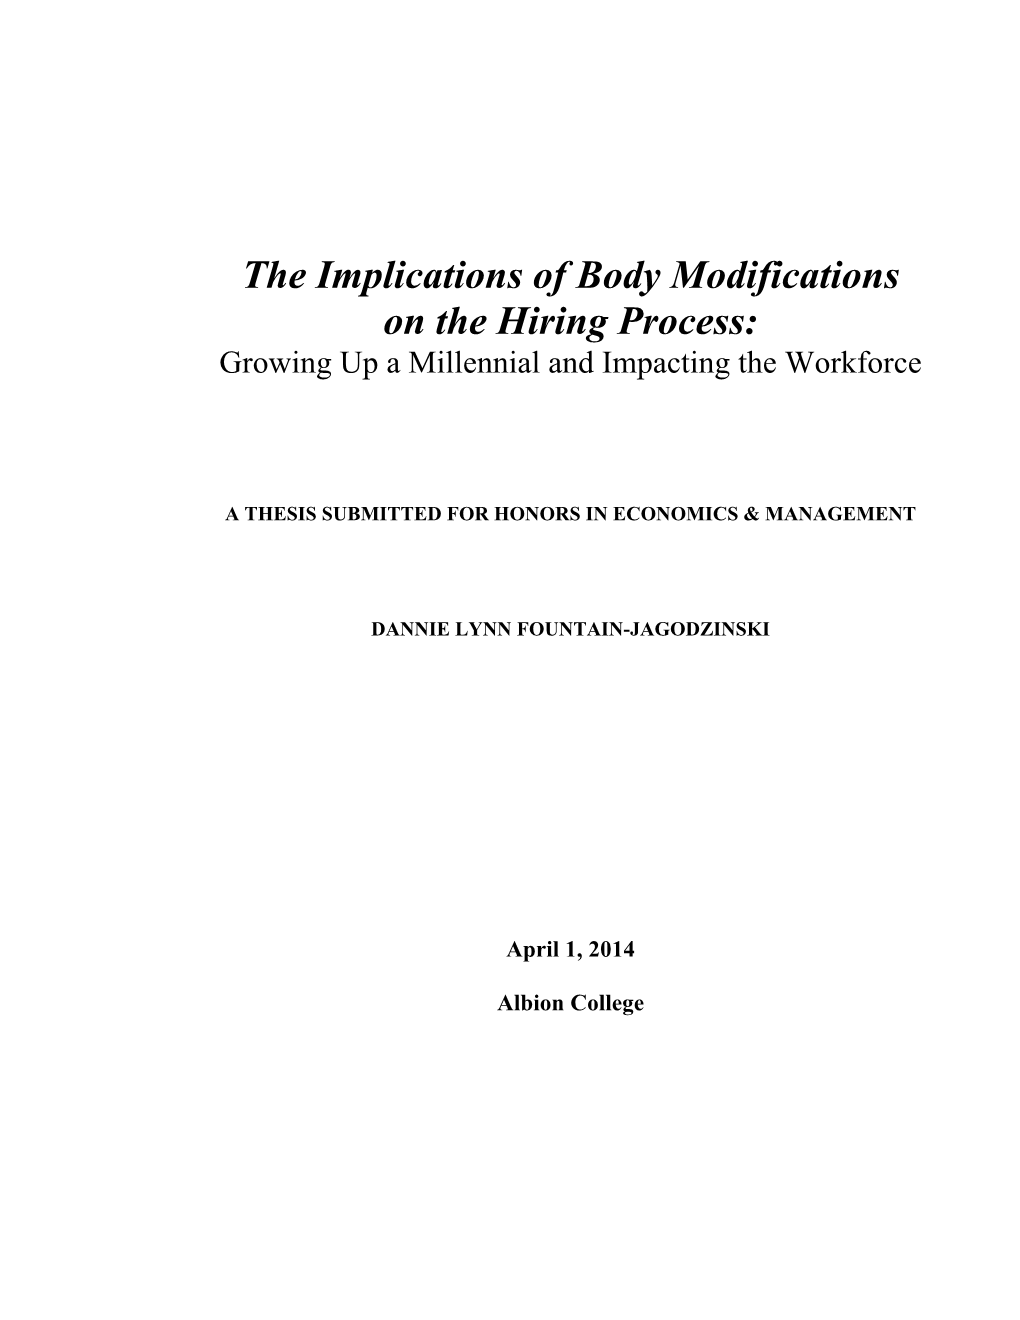 The Implications of Body Modifications on the Hiring Process: Growing up a Millennial and Impacting the Workforce